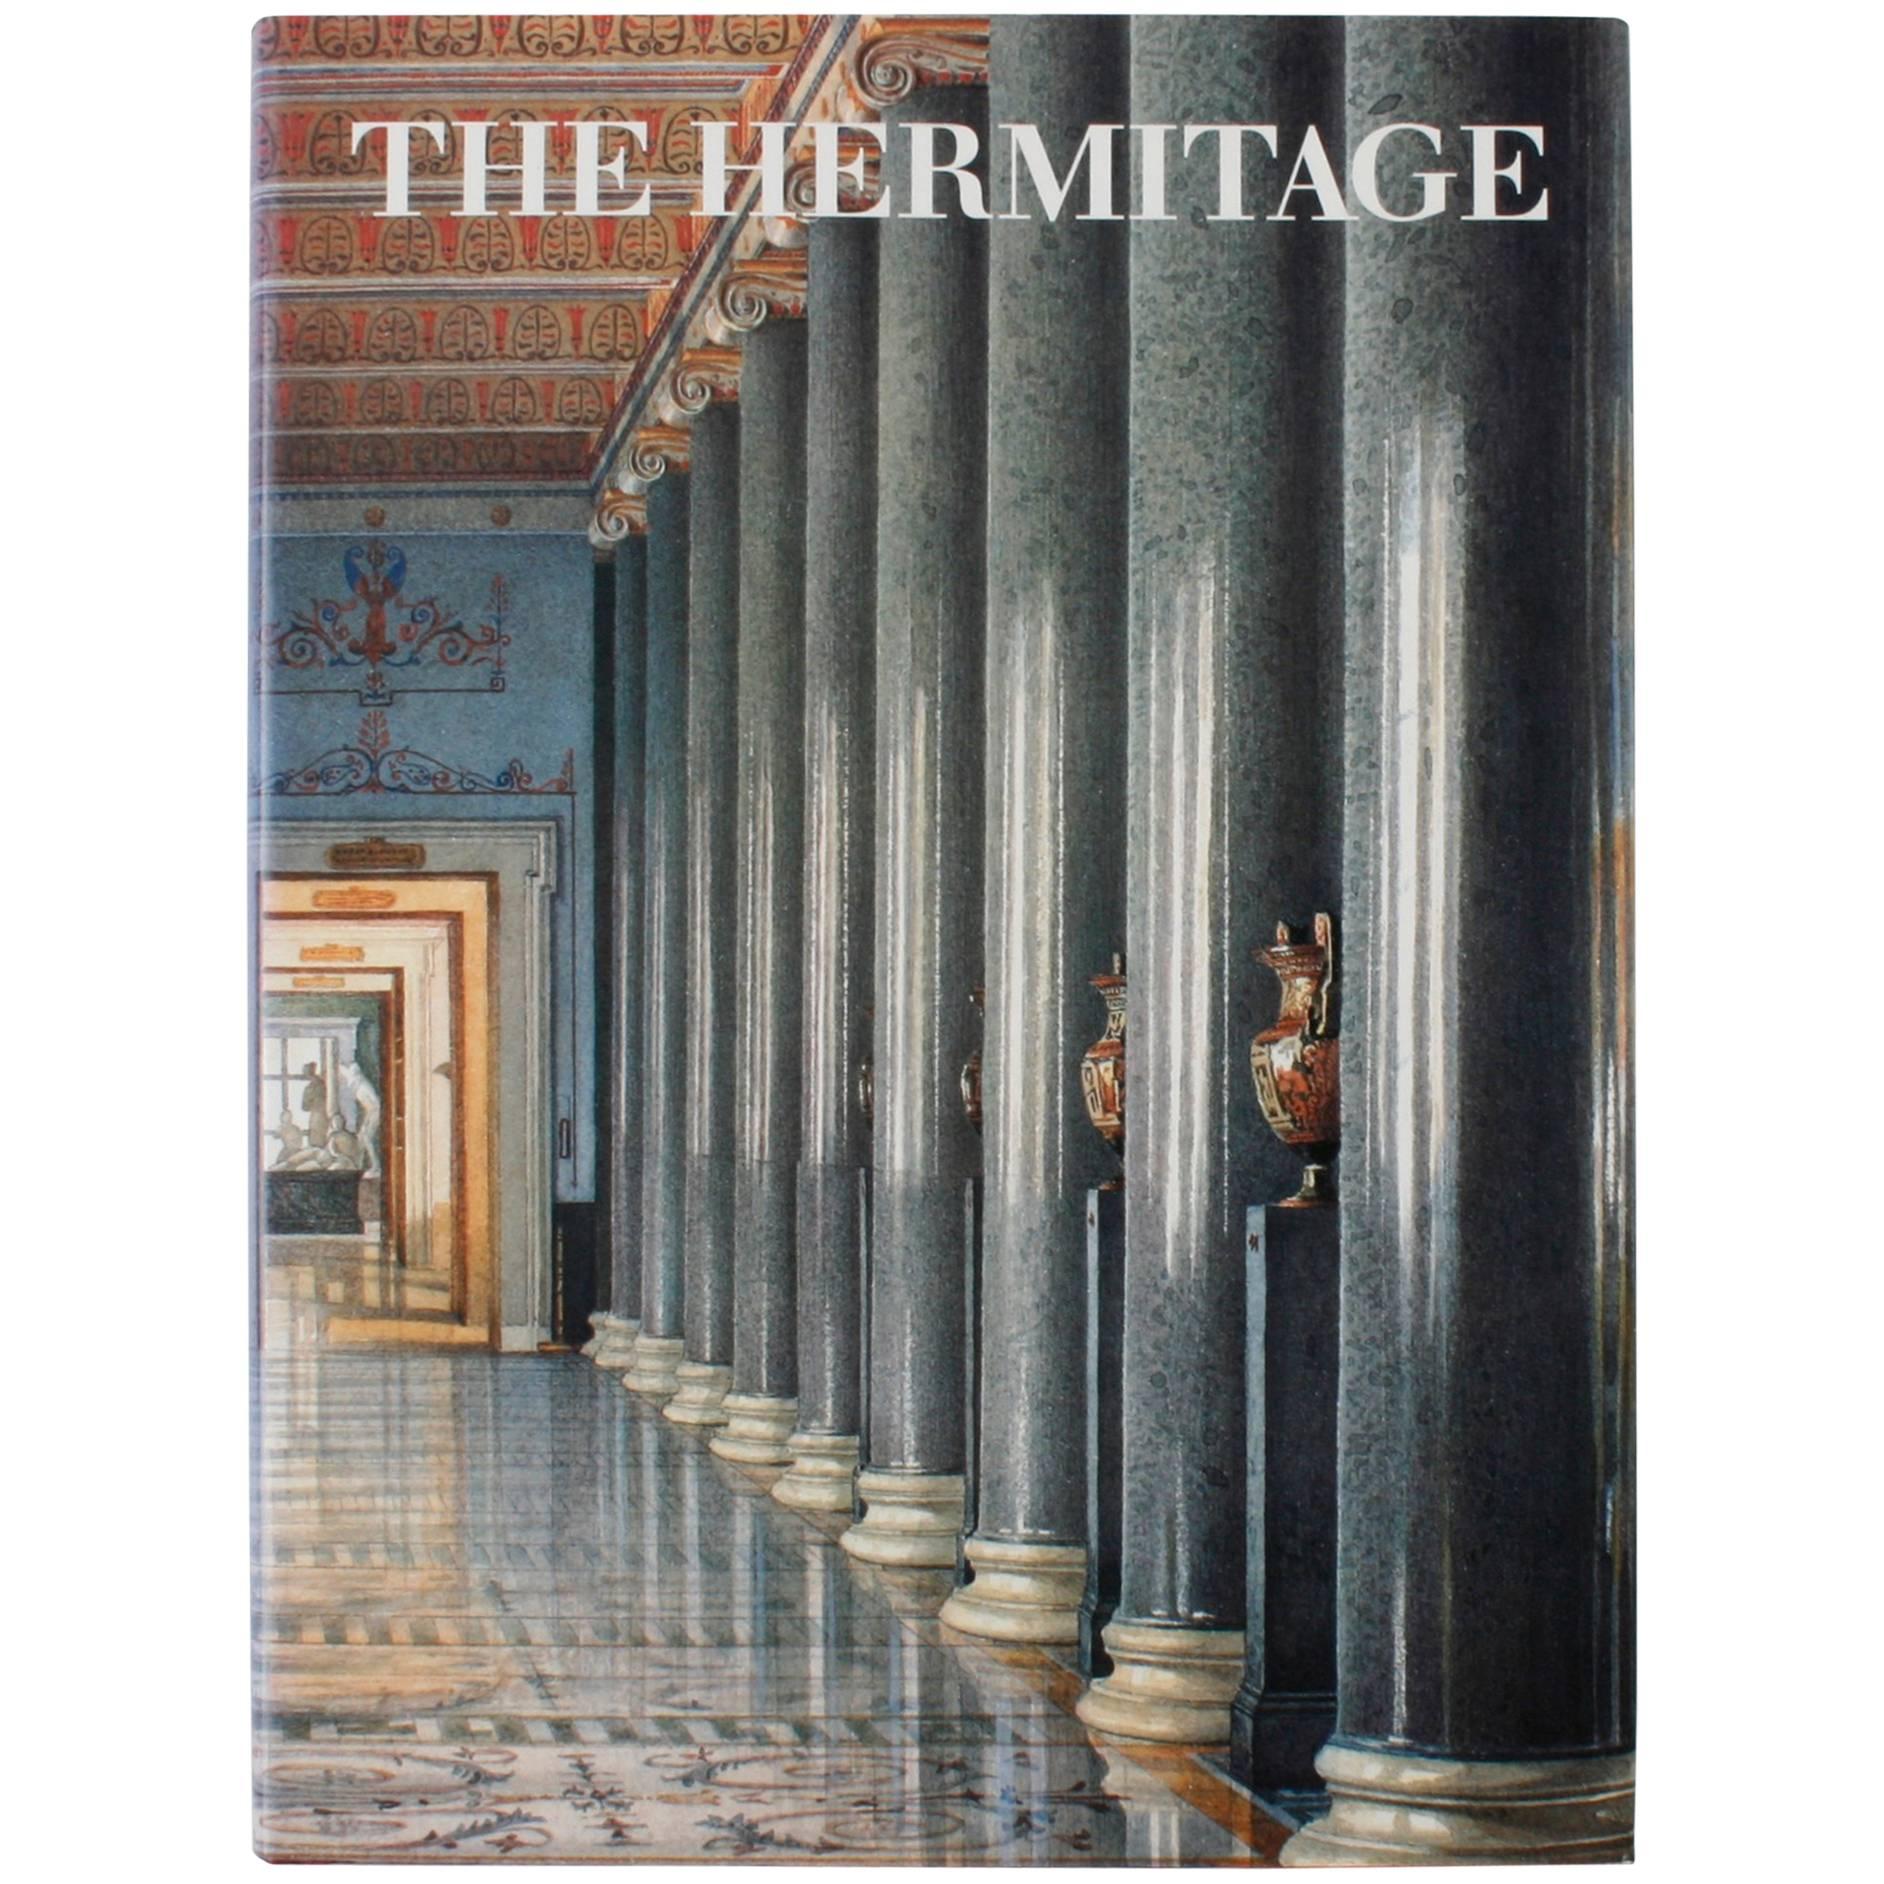 The Hermitage, First Edition